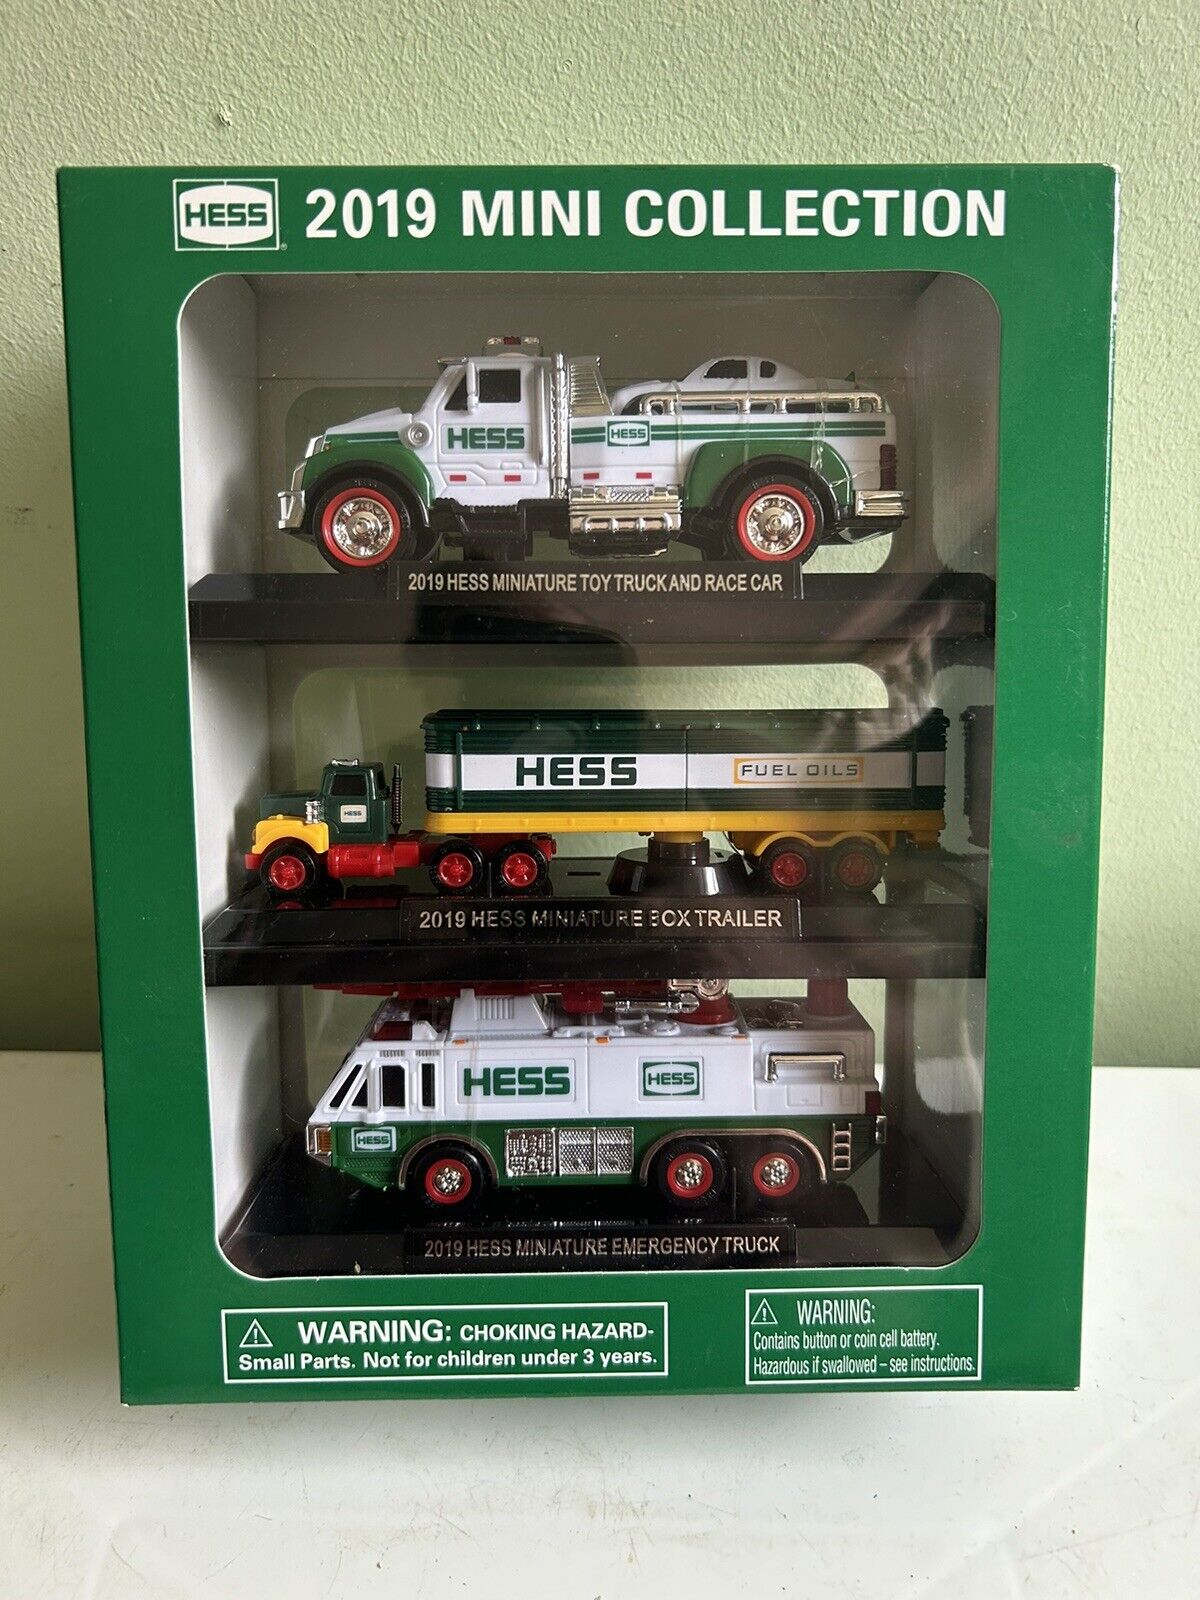 Hess Truck  2019 Mini Collection. New